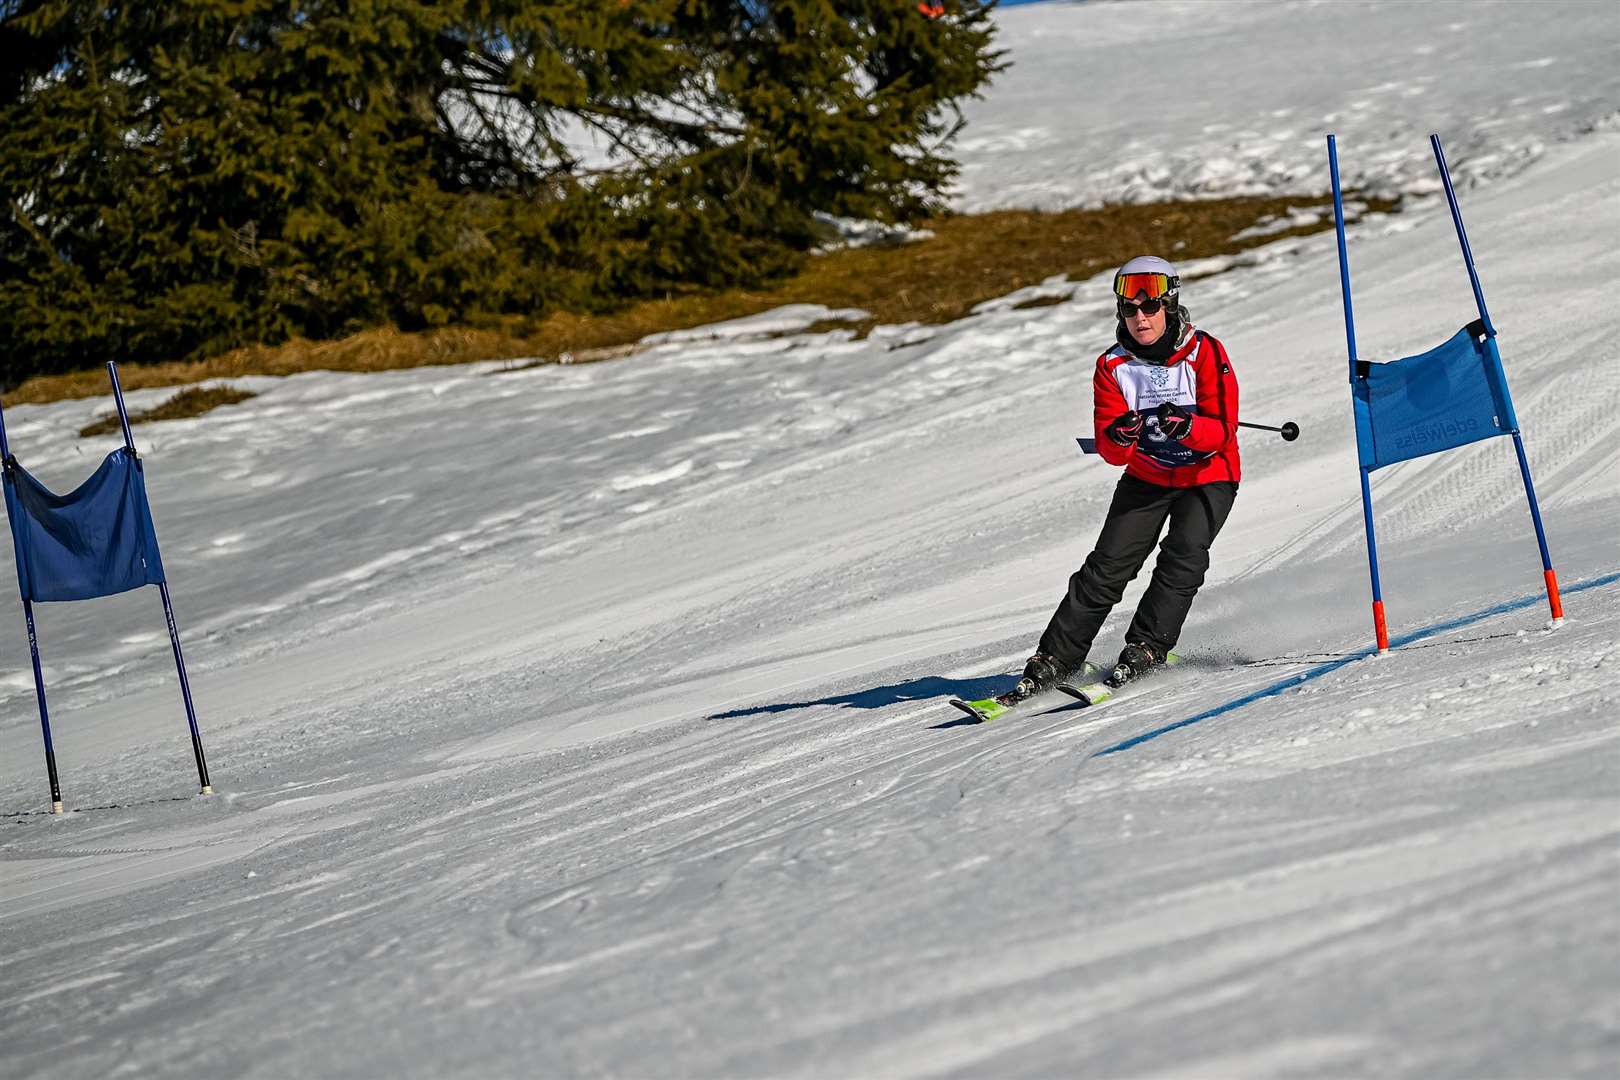 Kathryn Mearns on the slopes. Picture: www.naksportsimages.co.uk